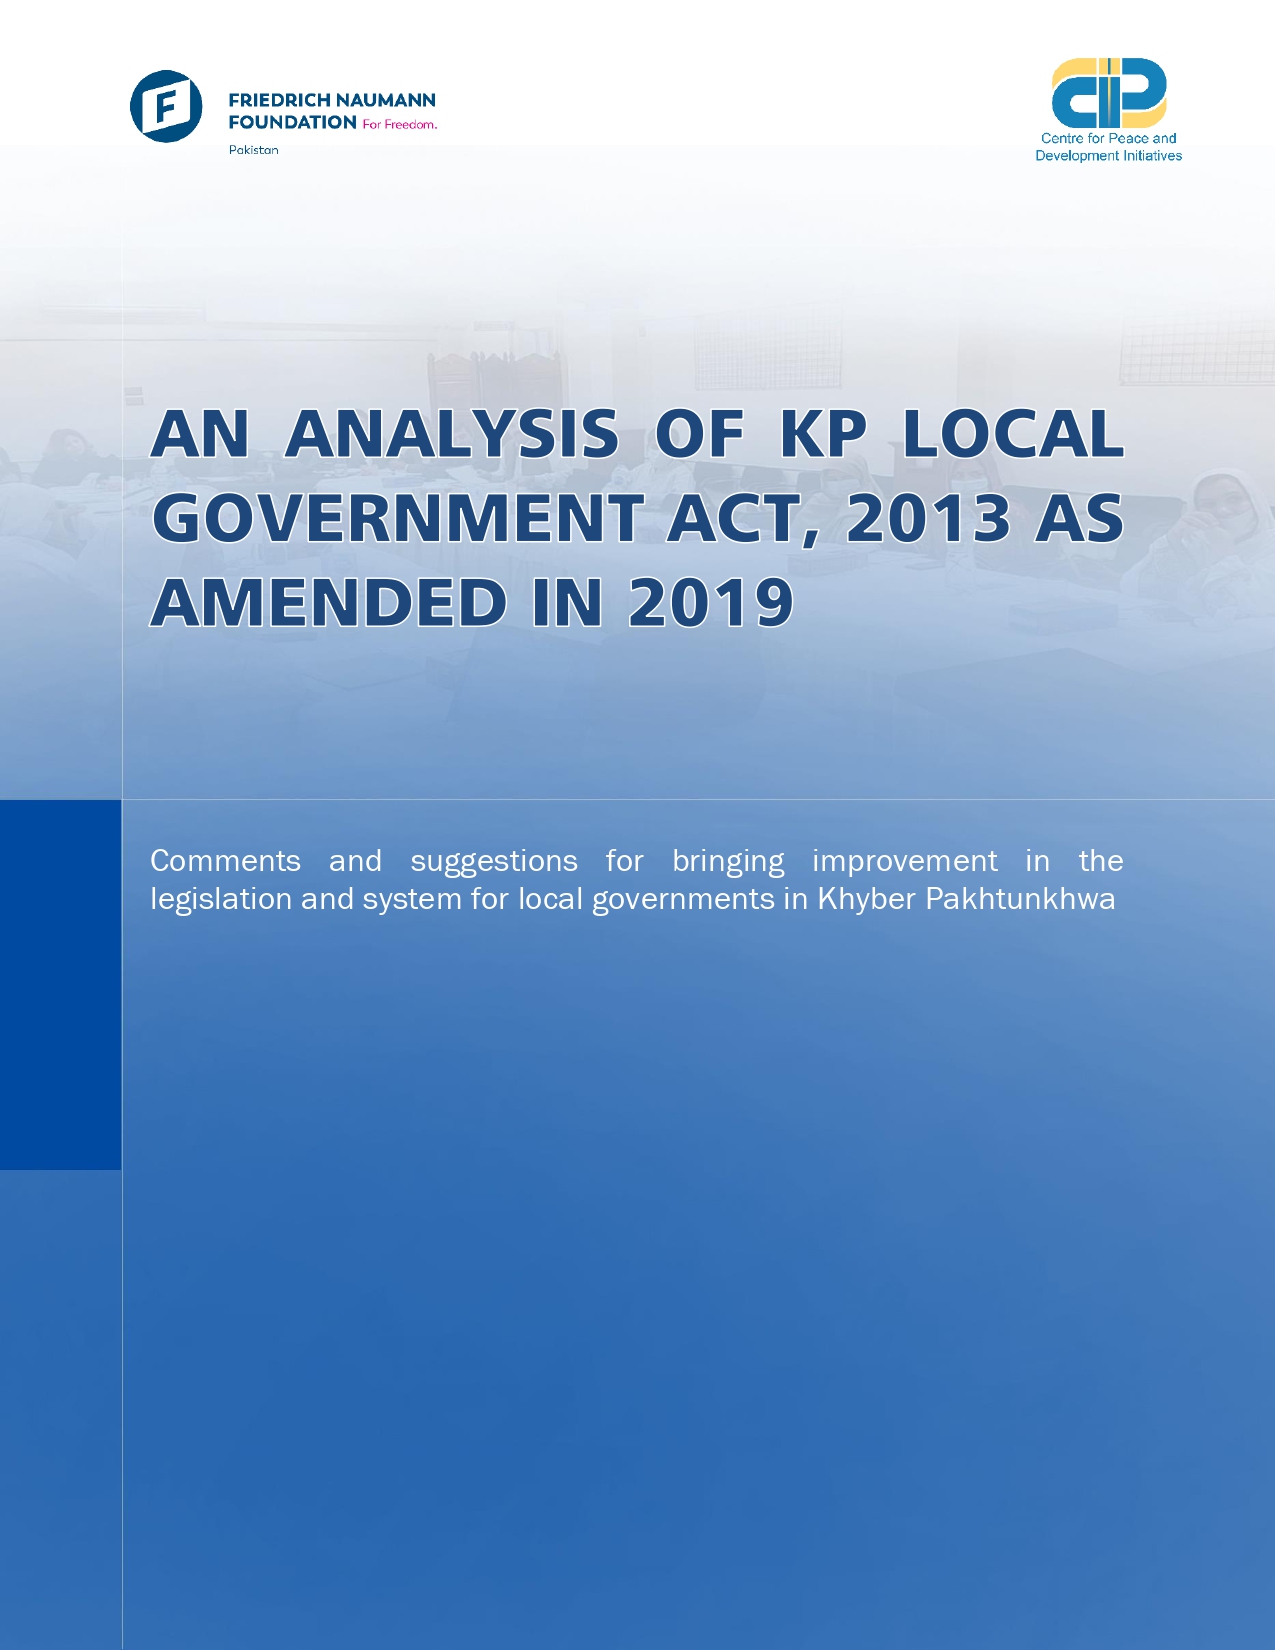 Analysis of KP Local Government Act 2013, as Amended in 2019